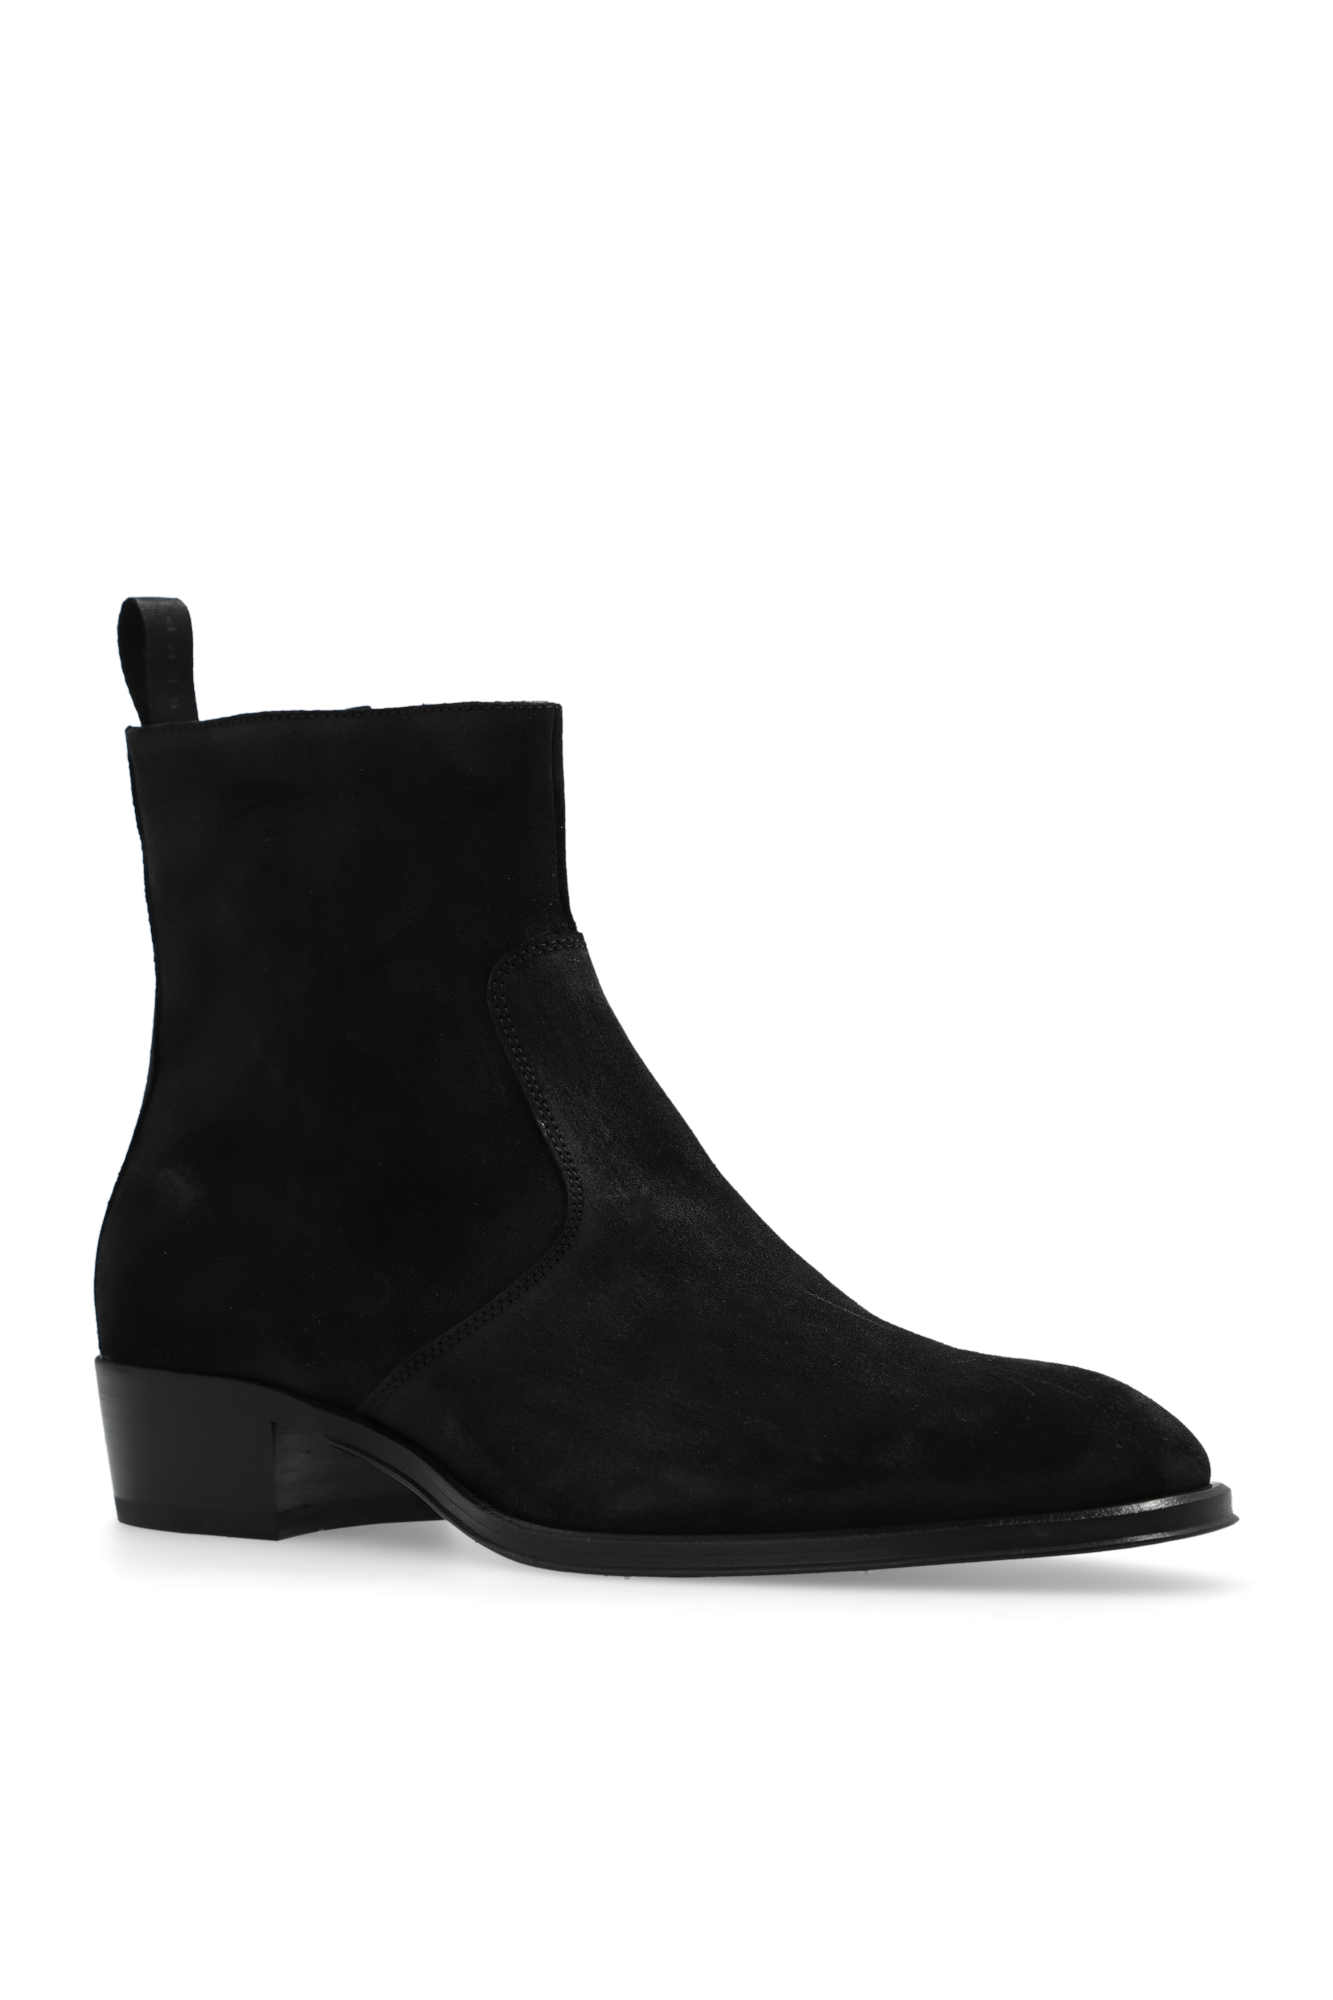 Giuseppe Zanotti ‘Ludhovic’ suede ankle boots